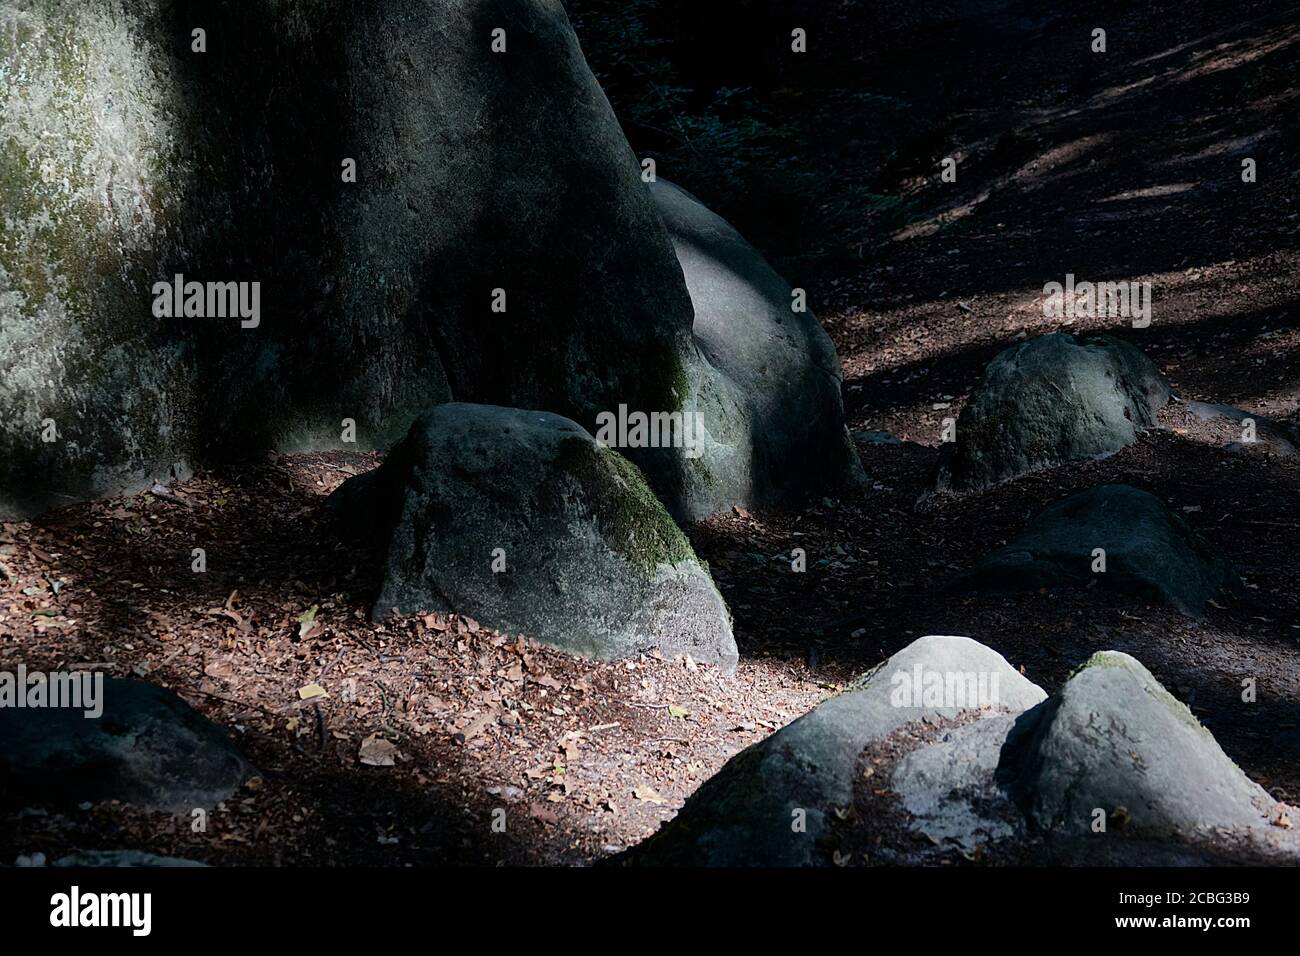 Dark sandstones protrude from the shady sunny forest floor Stock Photo